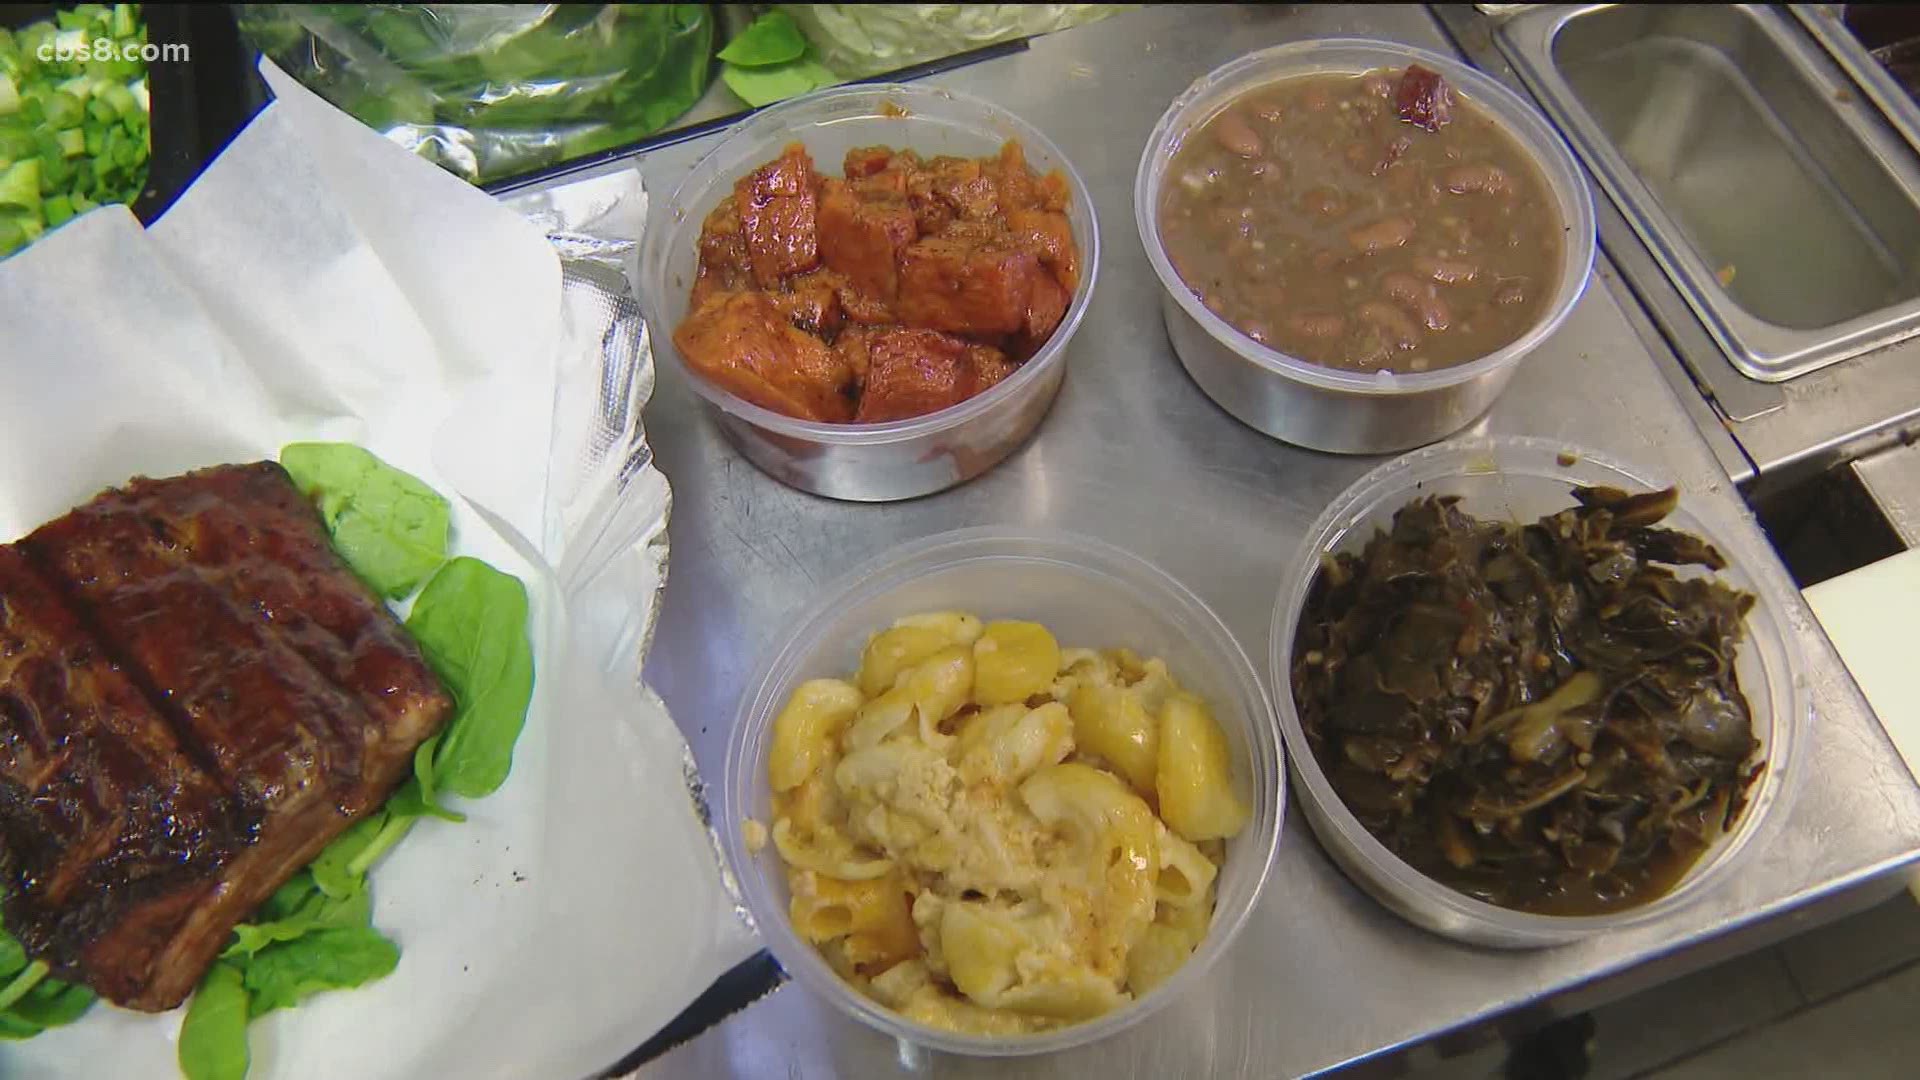 Felix's Barbecue with Soul is located in Oceanside. The owner Felix Berry says he is committed to hospitality and wants to bring southern charm to San Diego.